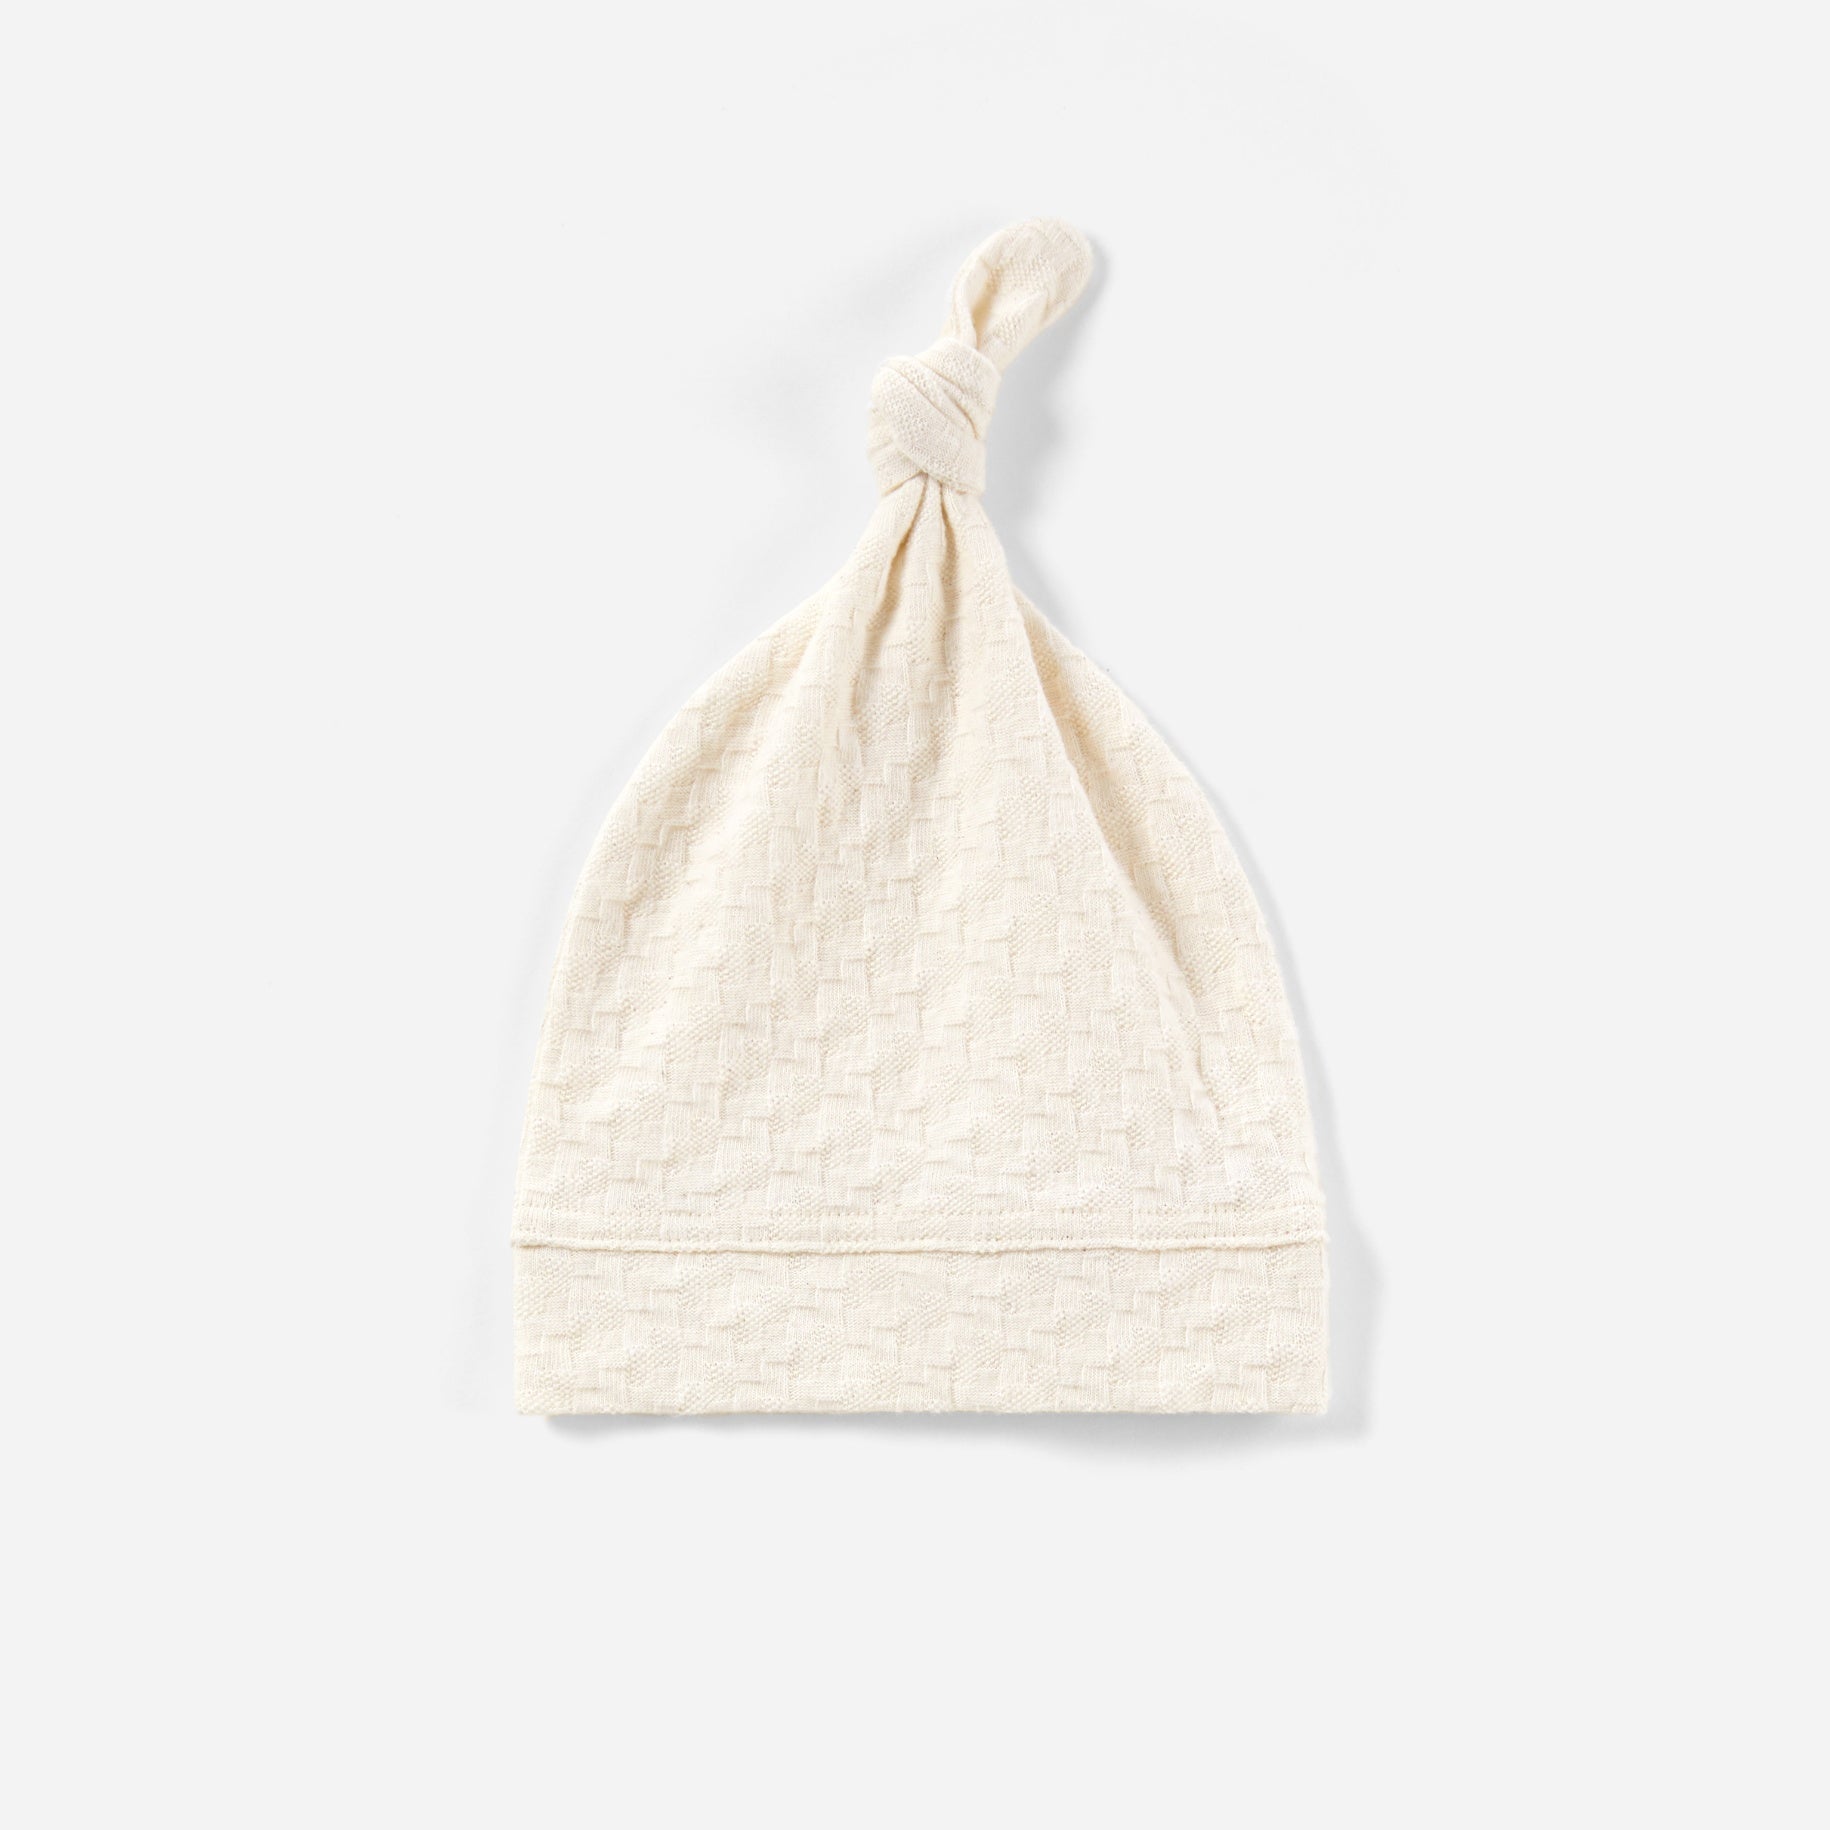 Baby Top Knot Hat Square Grid